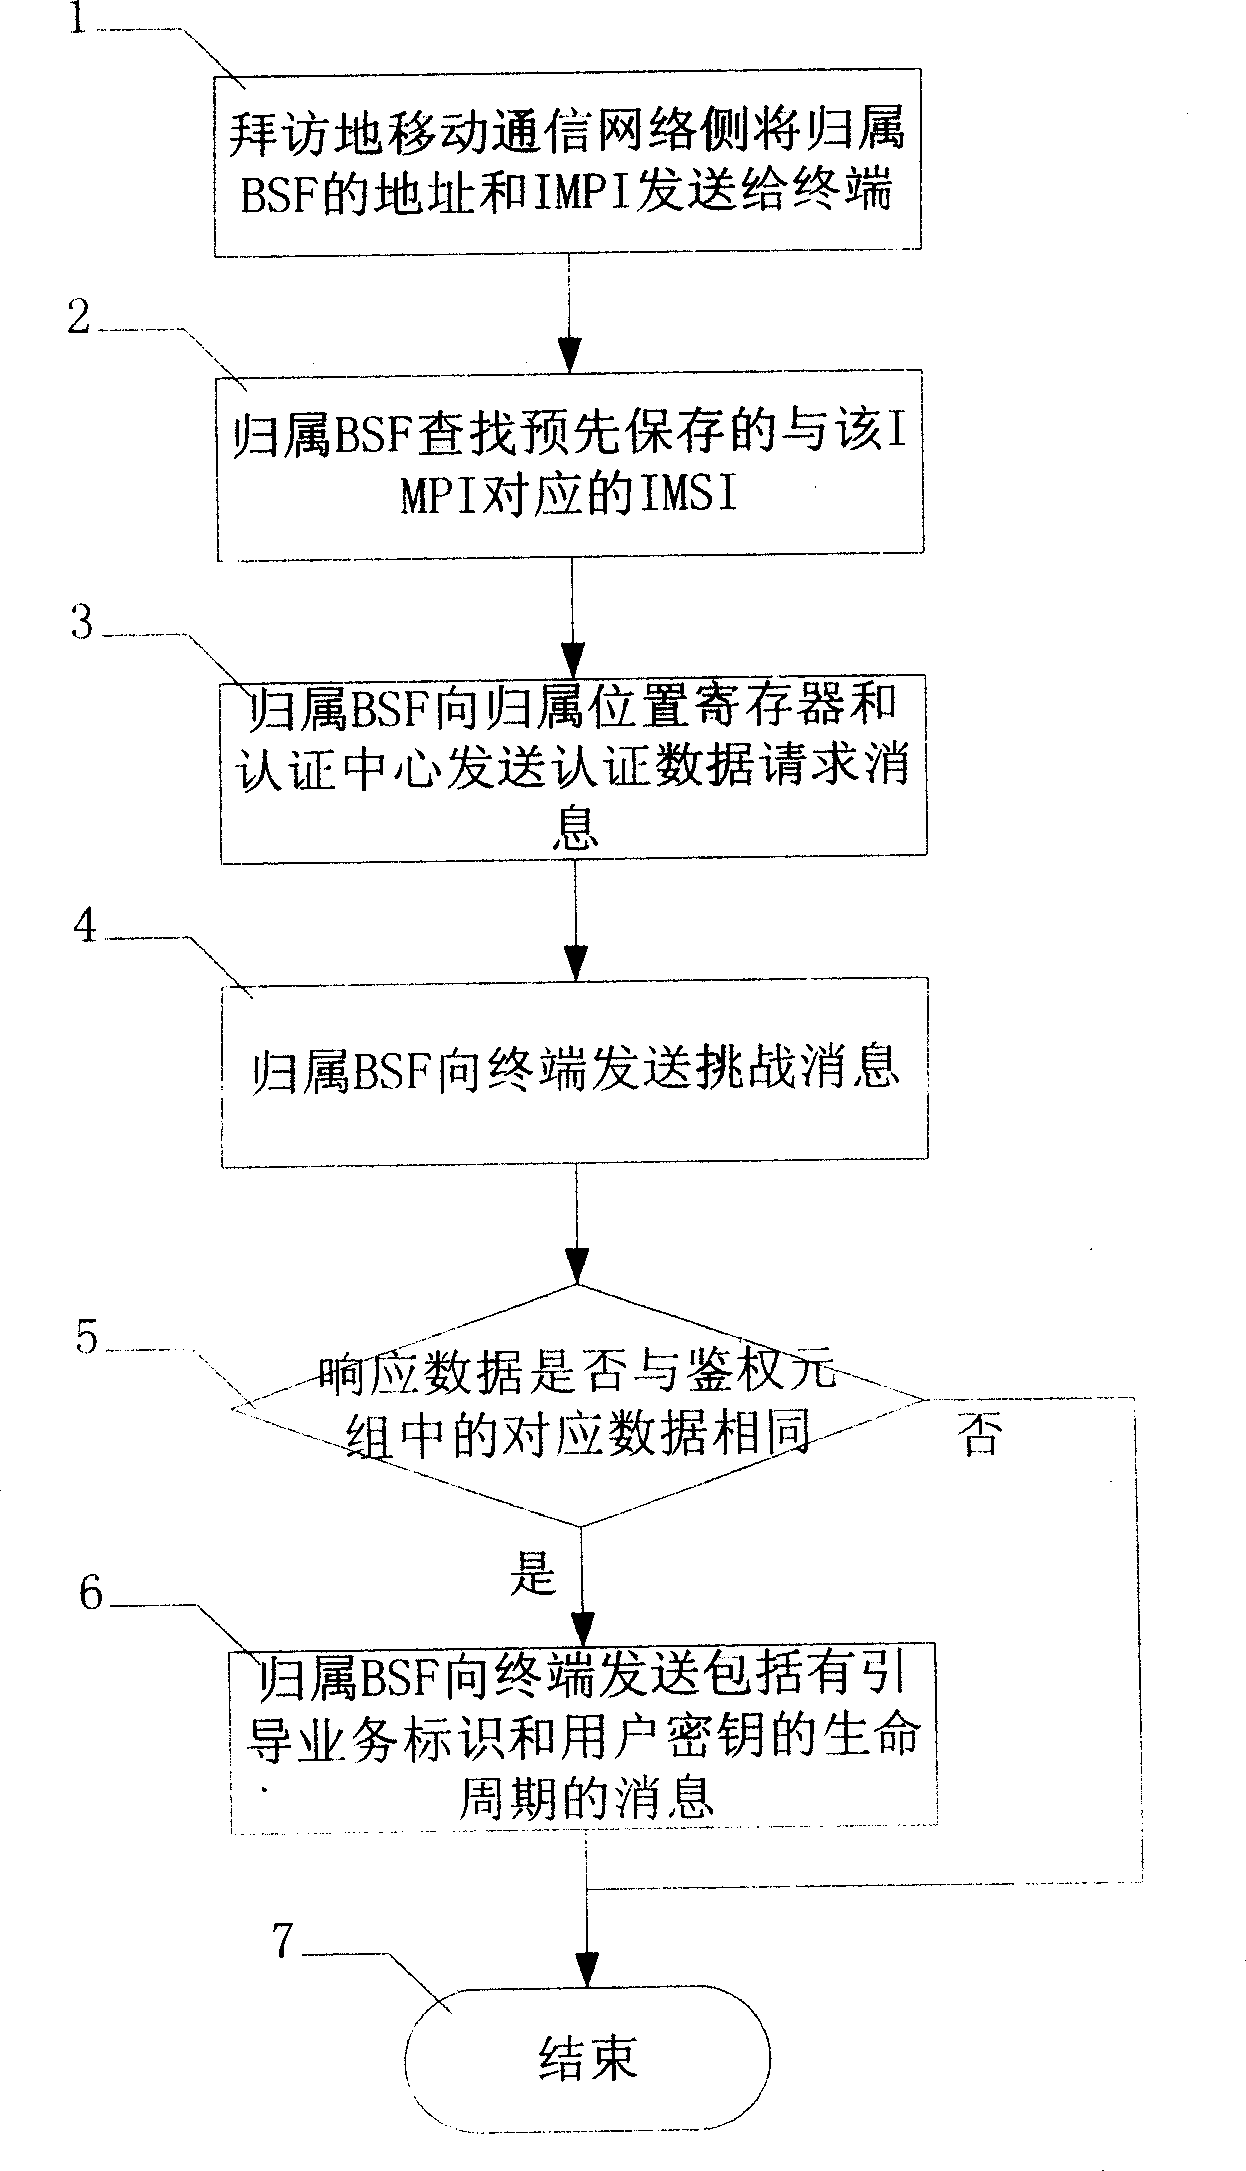 Method and system for realizing user key arrangement in mobile broadcast television service